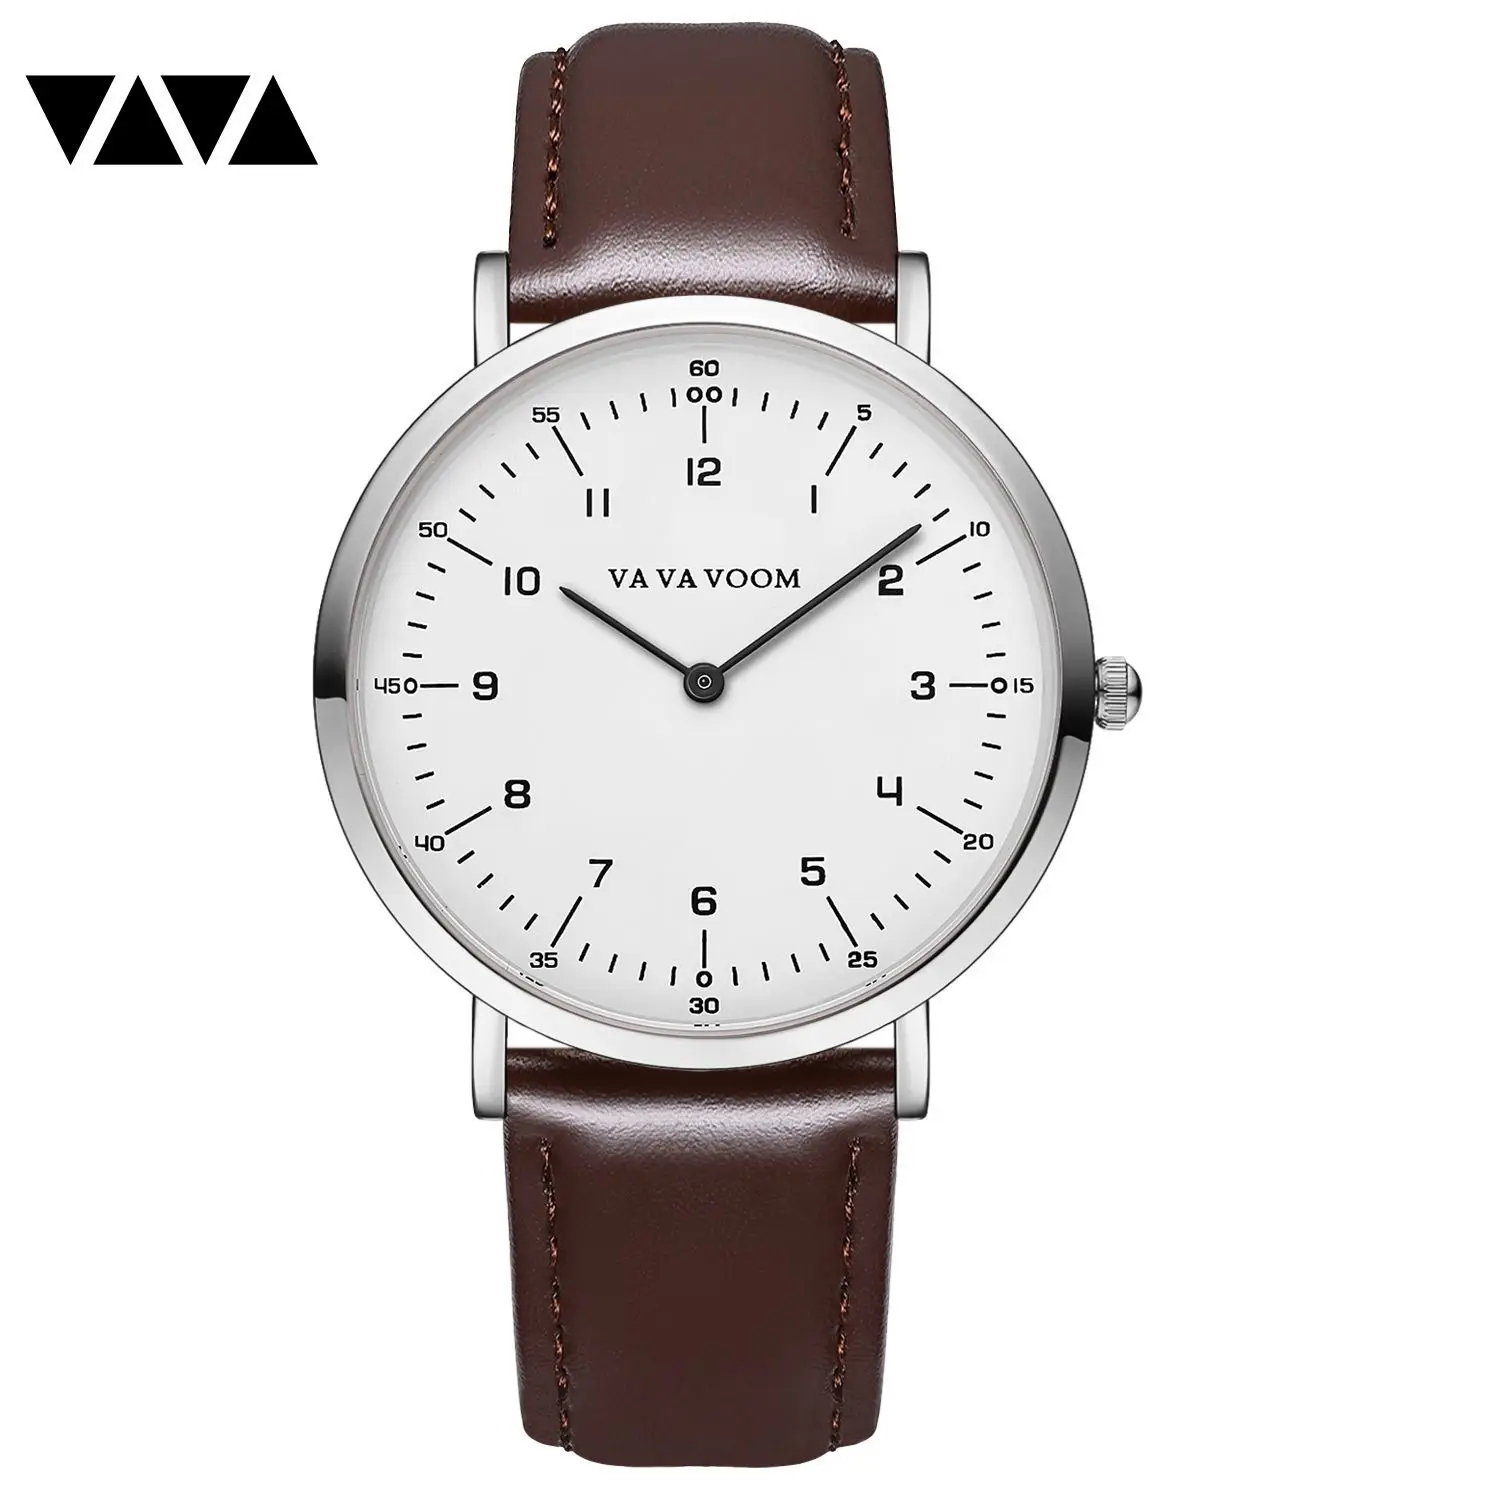 2020 Fashion Mens Watches Sport Leather Top Quartz Male Clock Luxury Military Watches Anniversary Gifts for Husband reloj hombre